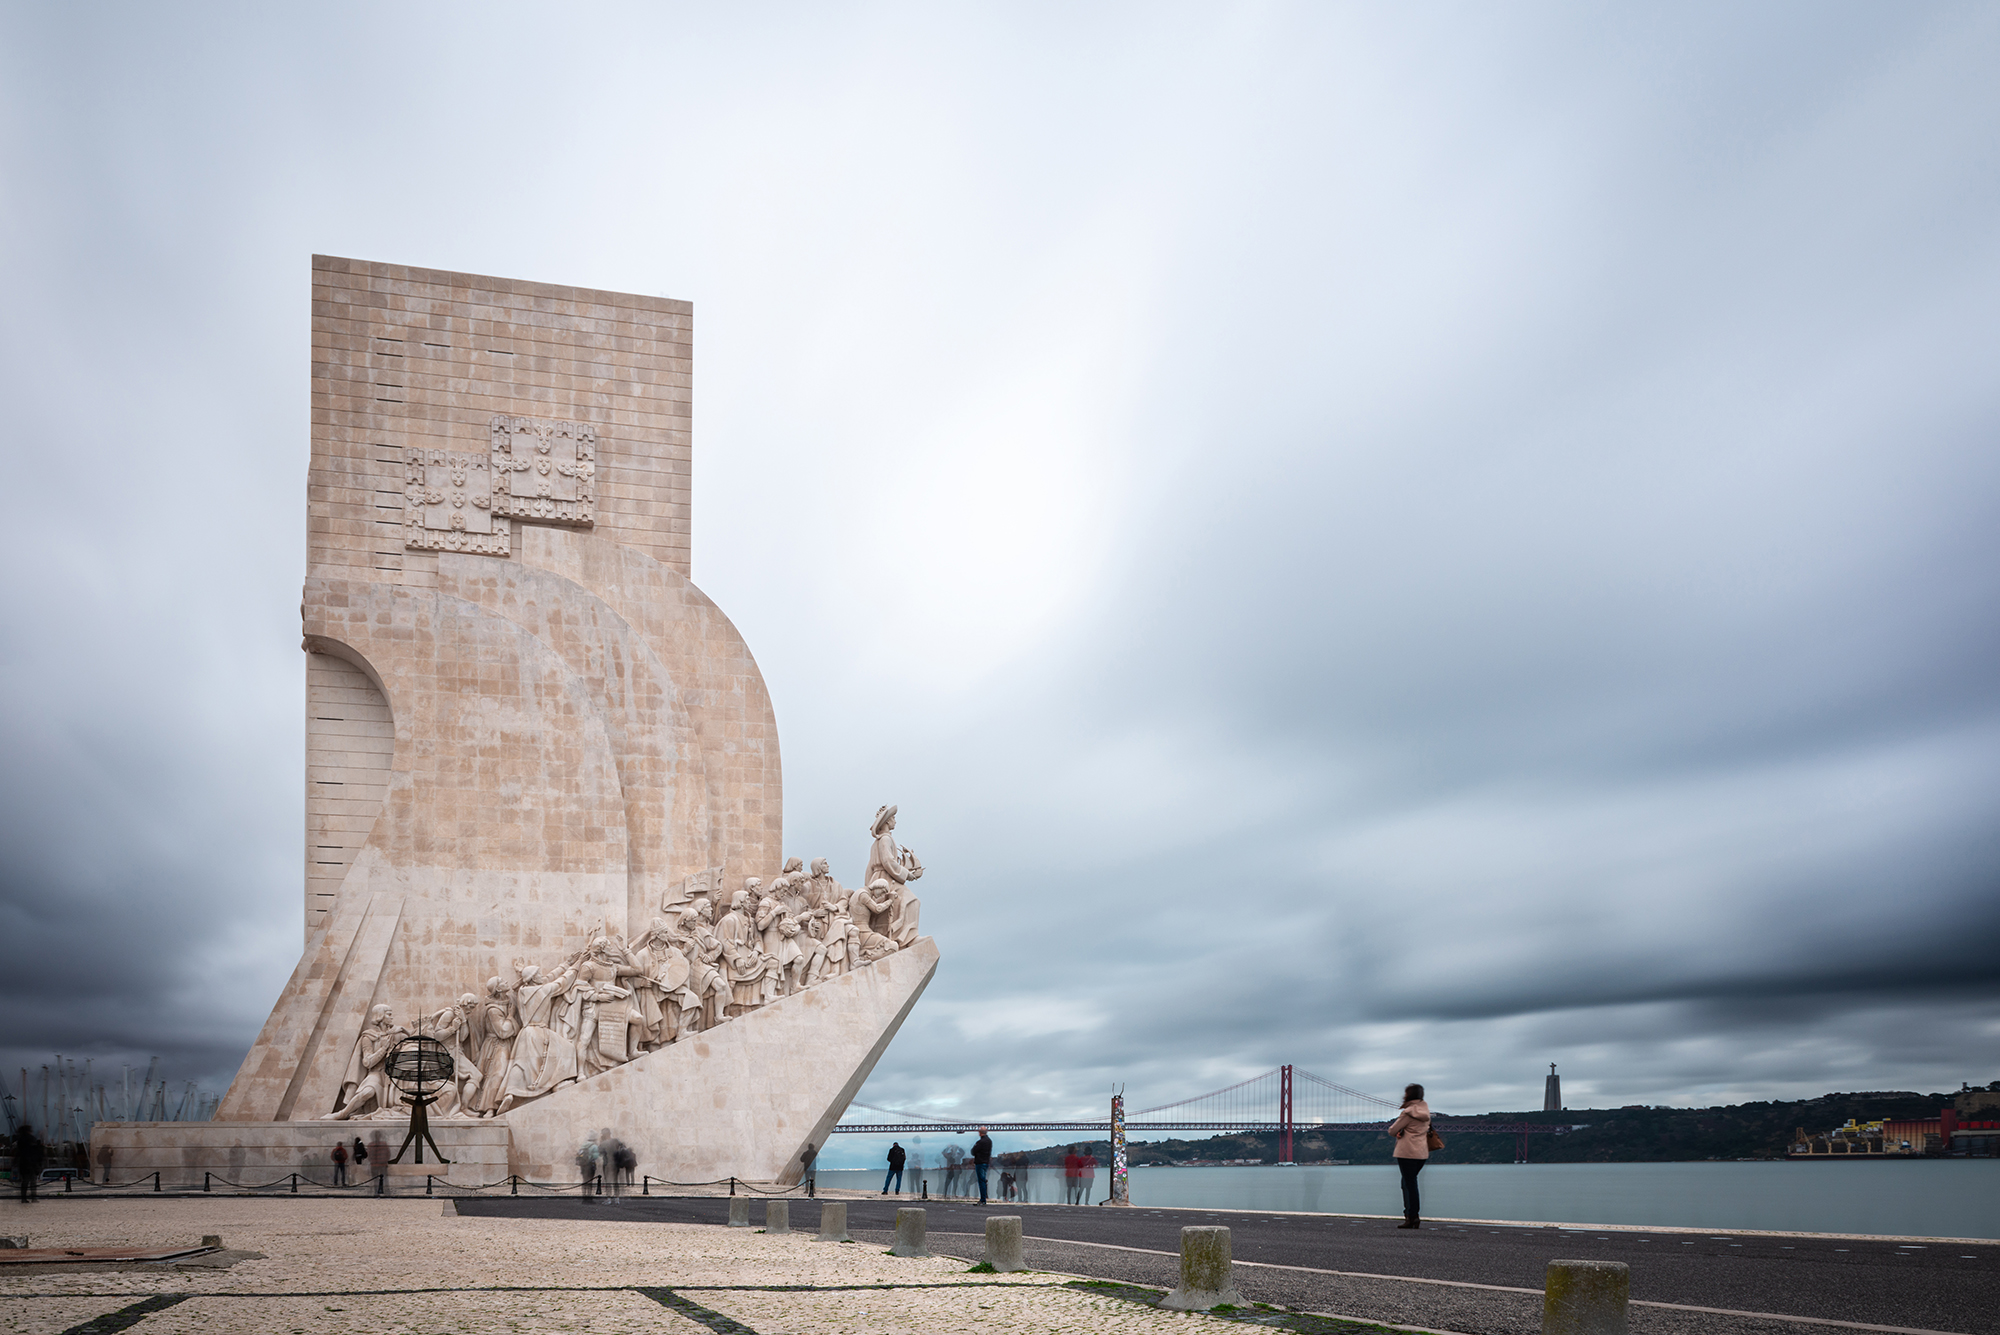 Monument to the Discoveries (Pedrao dos Descobrementos) on the North bank of the Tagus River